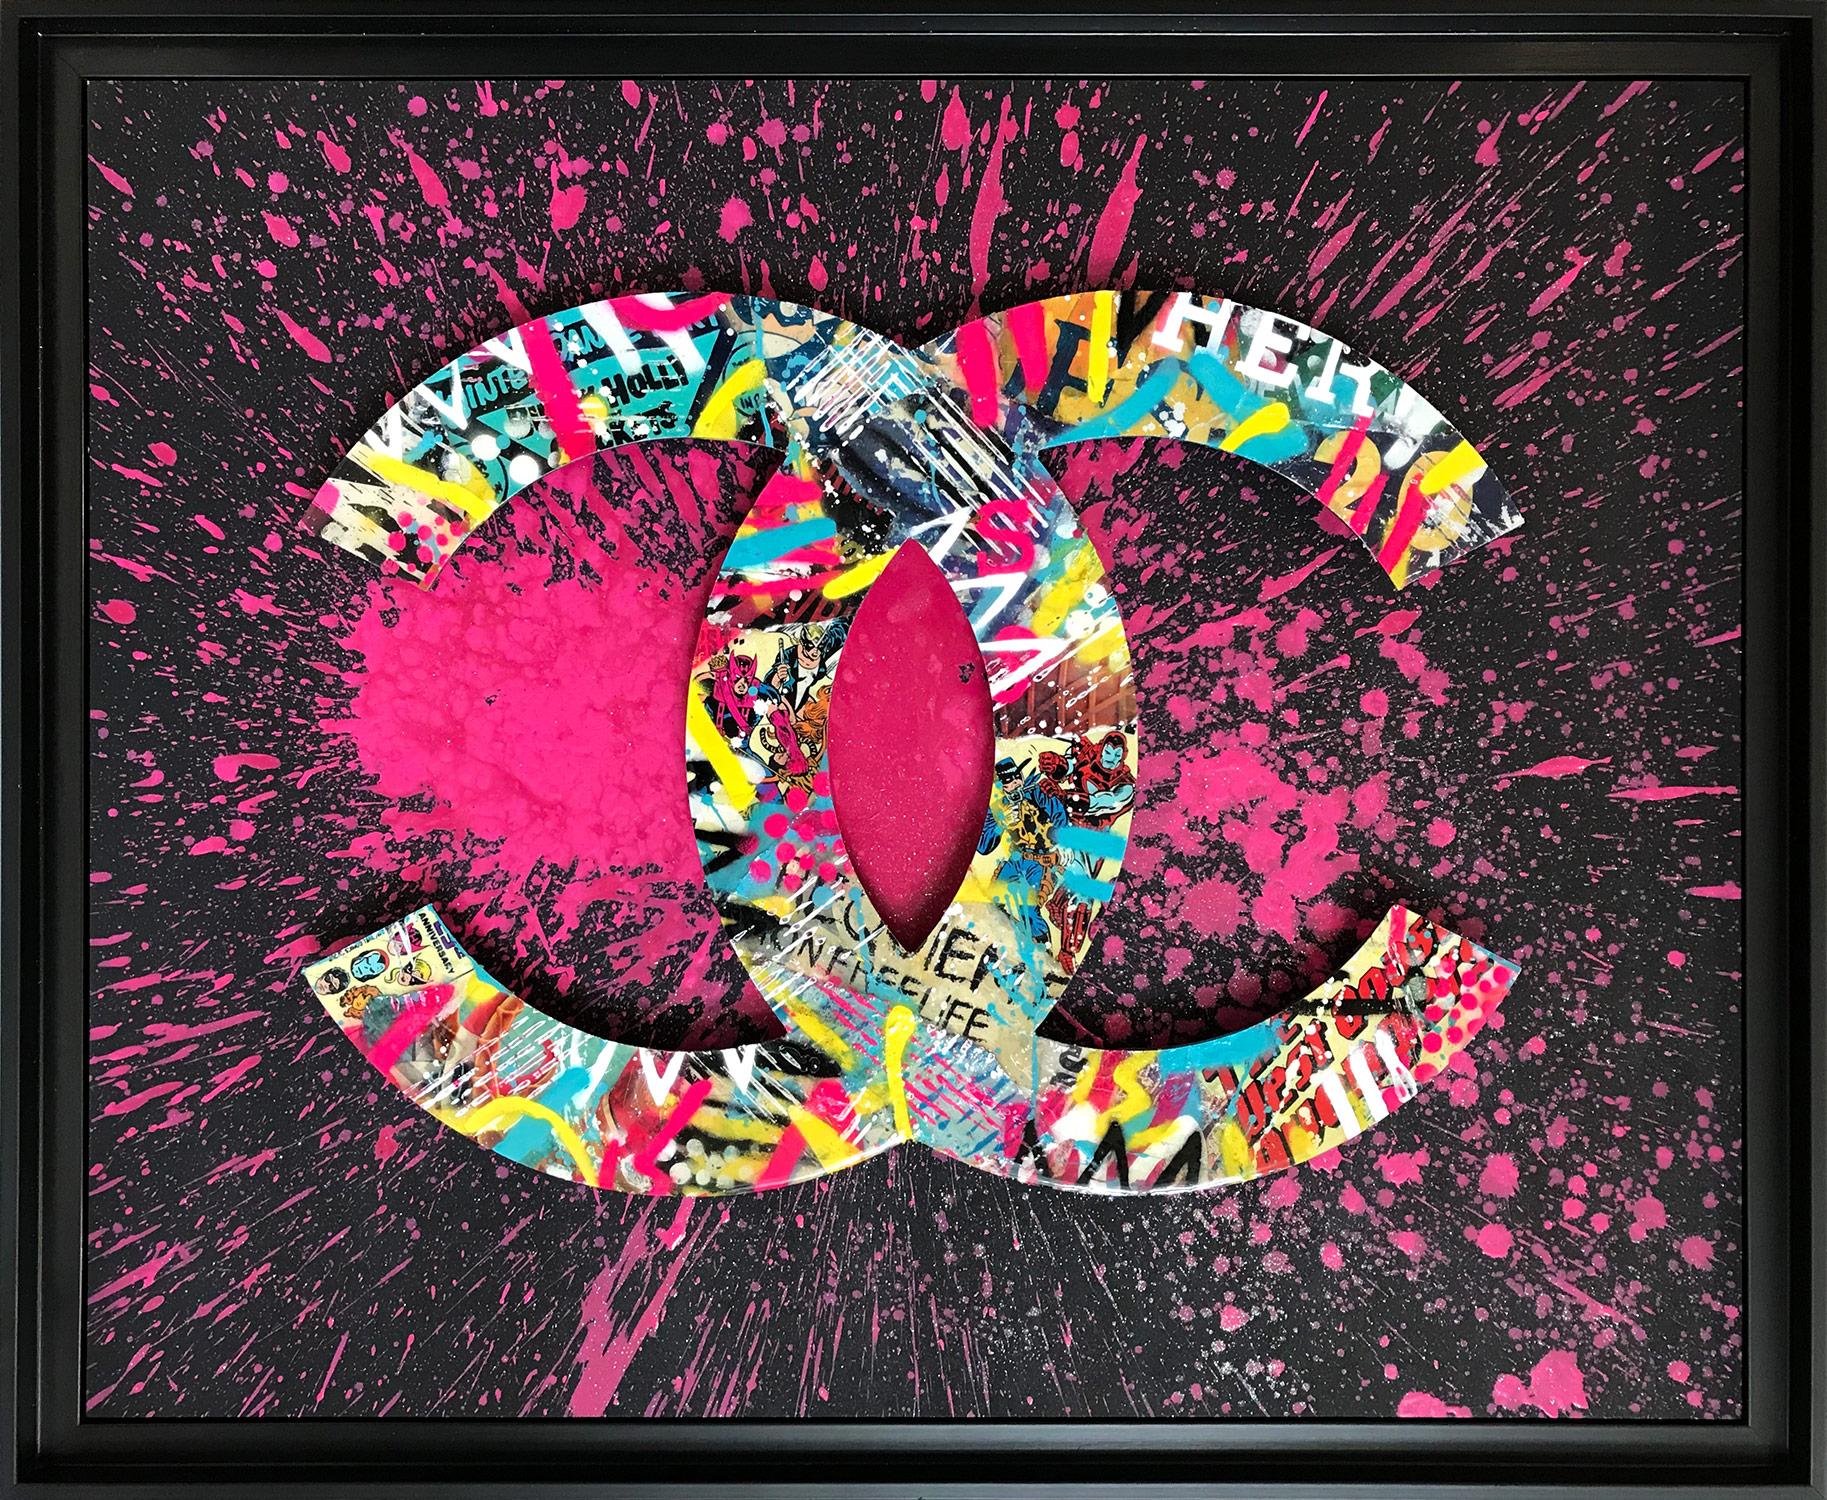 Aiiroh Abstract Painting - "Street Box CC (Pink)" Colorful Mixed Media Pop Art Work by French Street Artist